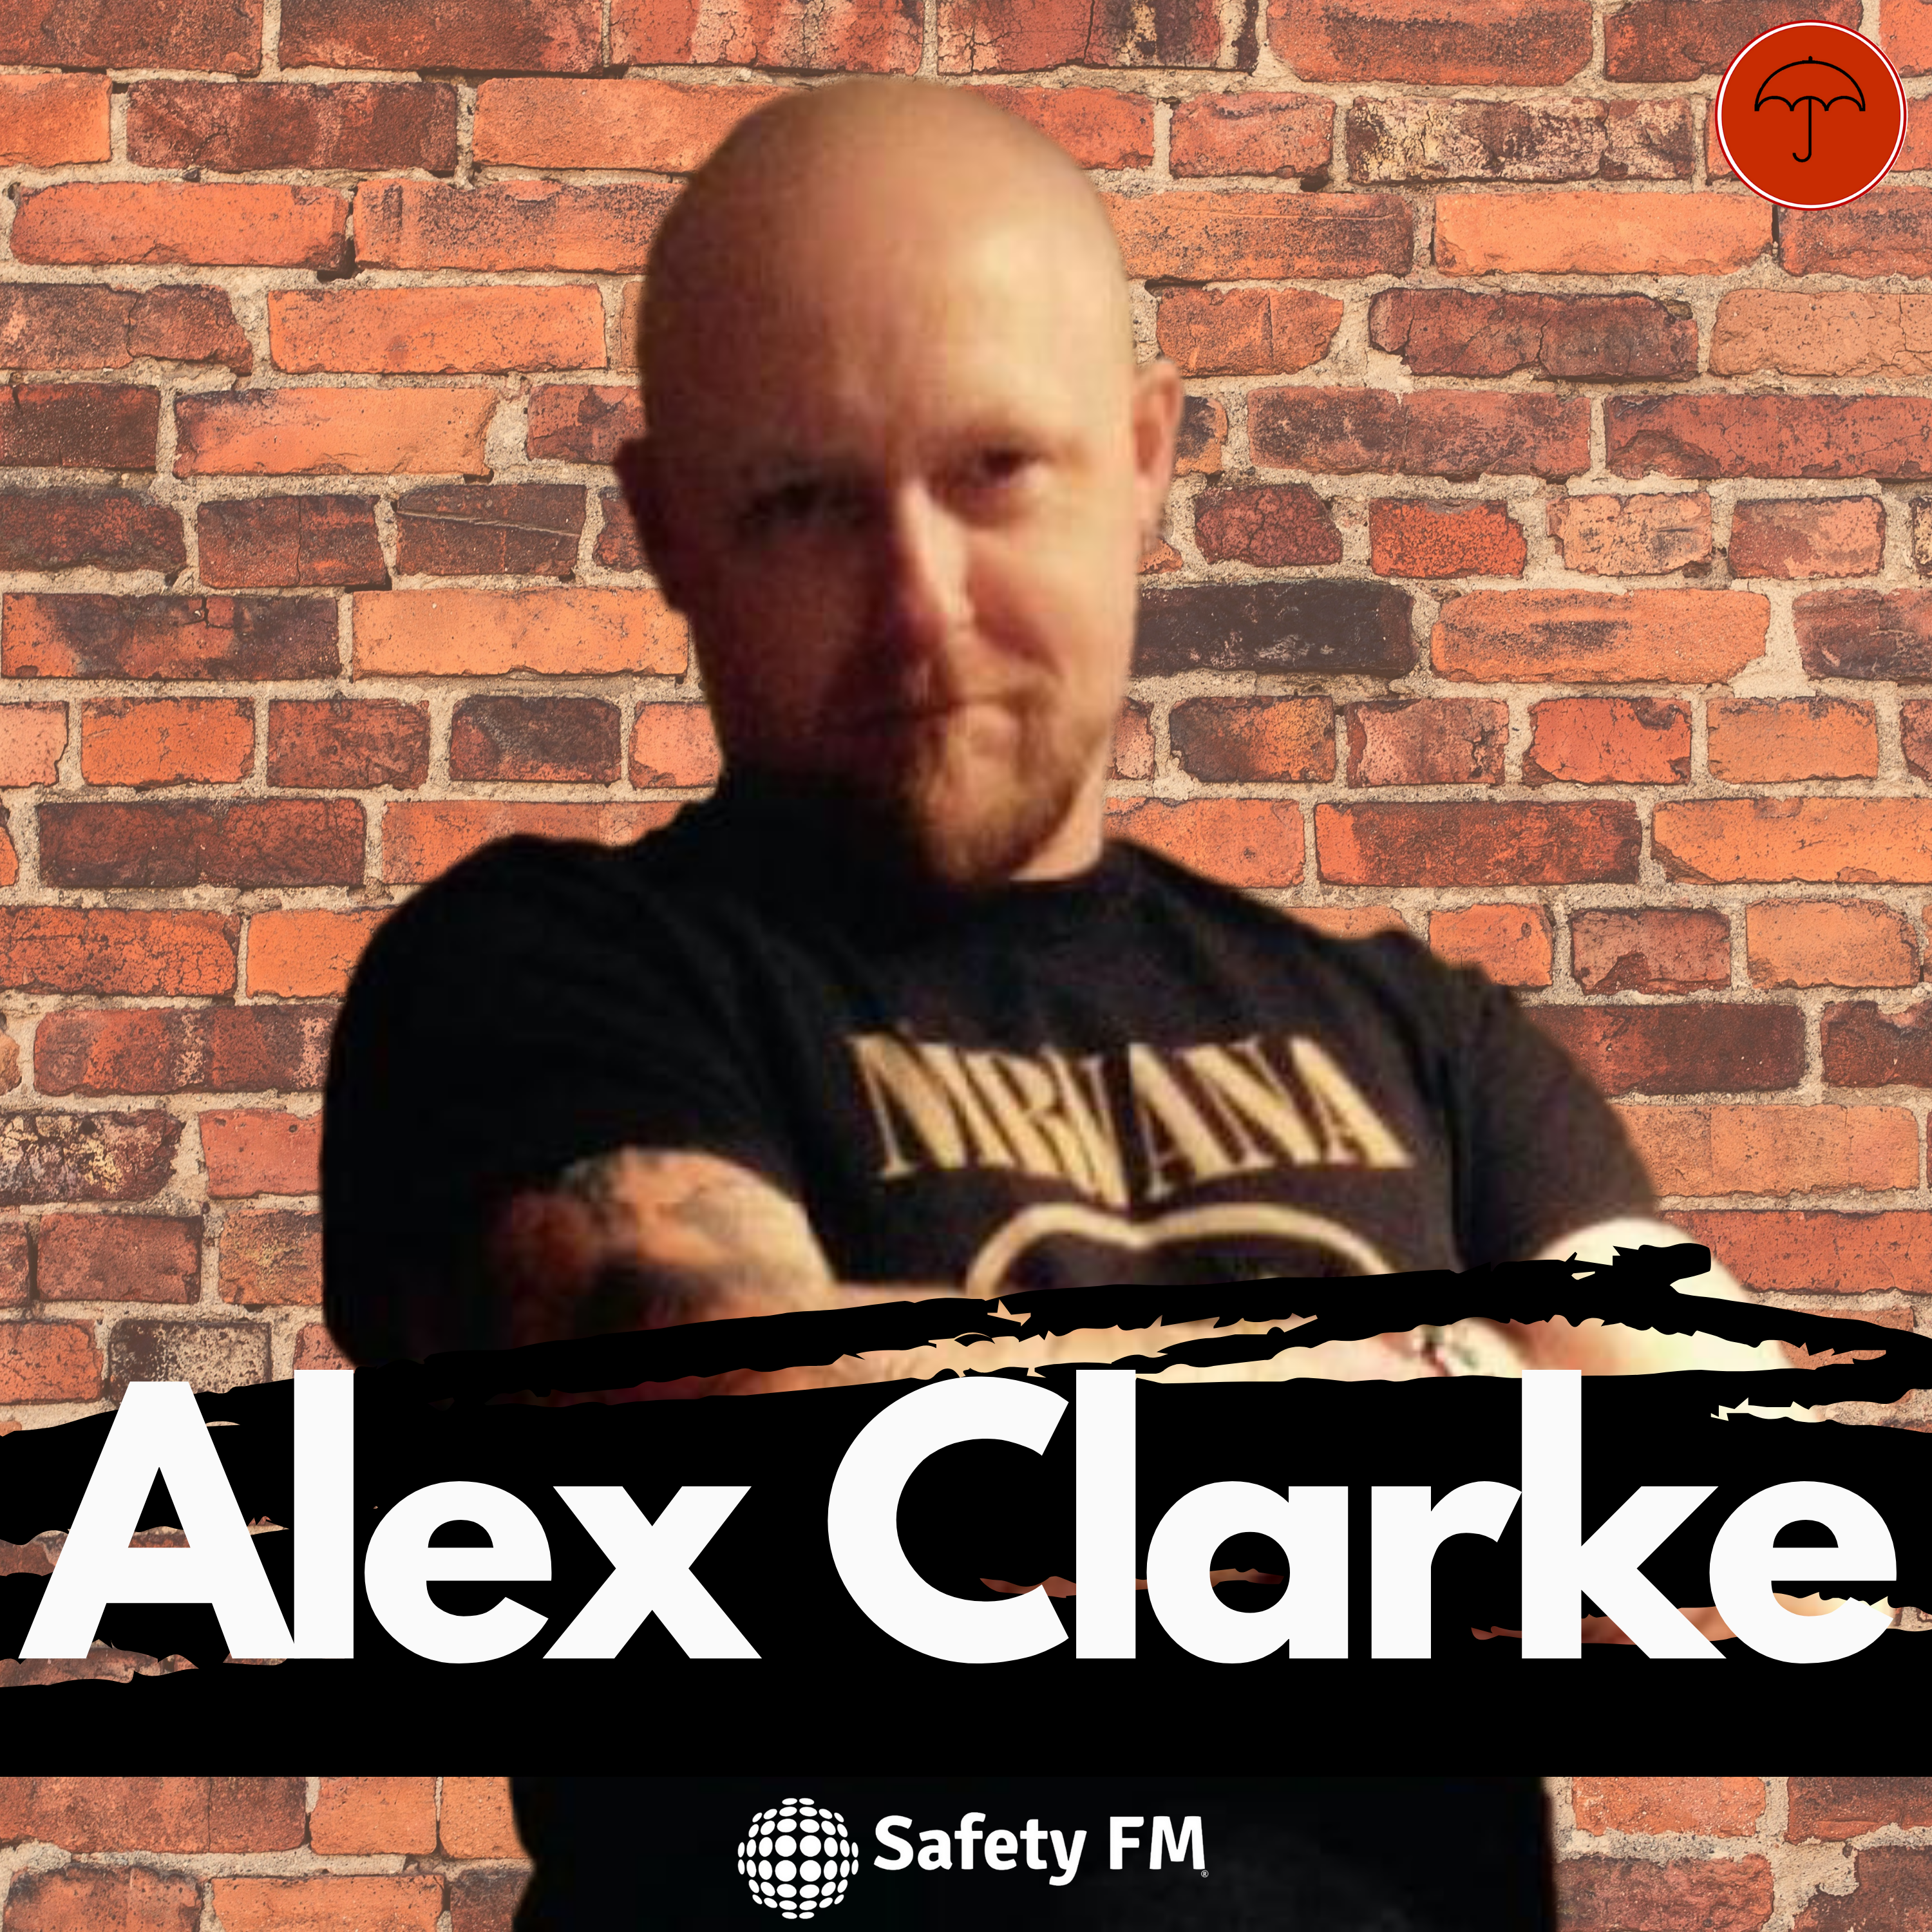 Rebranding Safety with Alex Clarke TW: Talk of suicide